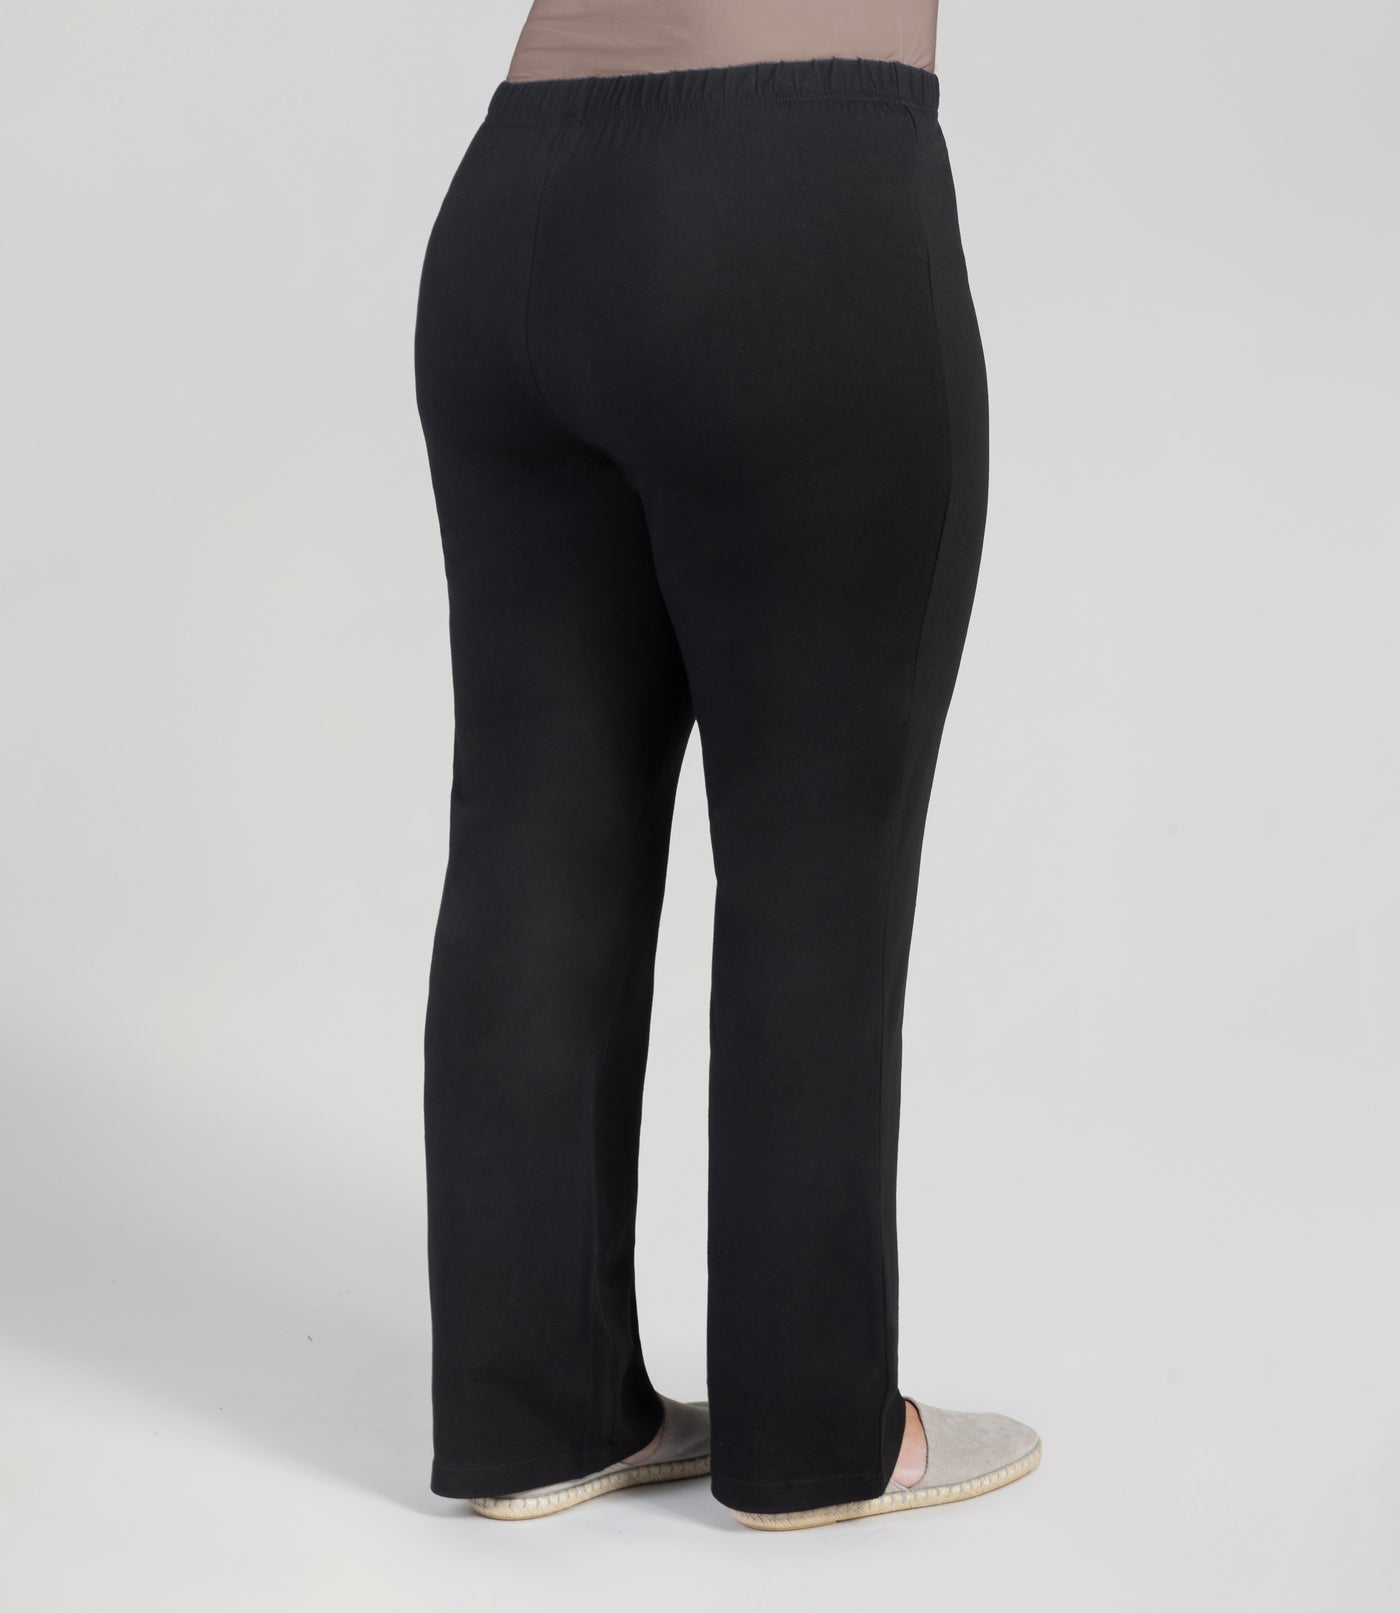 Back view, bottom half of plus sized woman, wearing JunoActives Stretch Naturals loosest bootcut leggings and are full length with an elastic waist band in black.